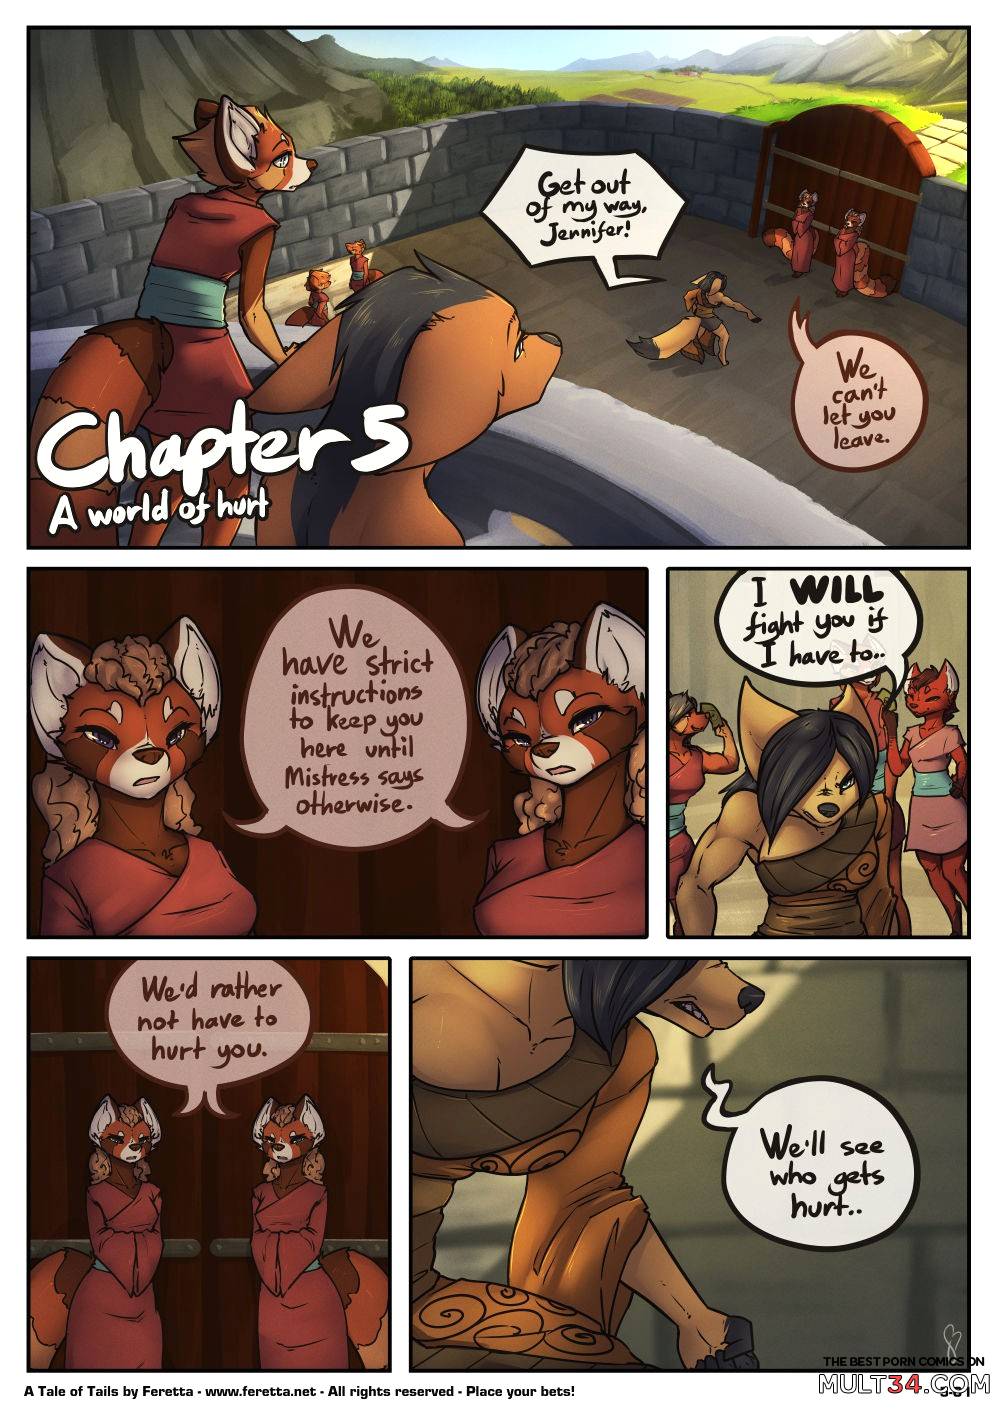 A Tale of Tails: Chapter 5 - A World of Hurt page 1